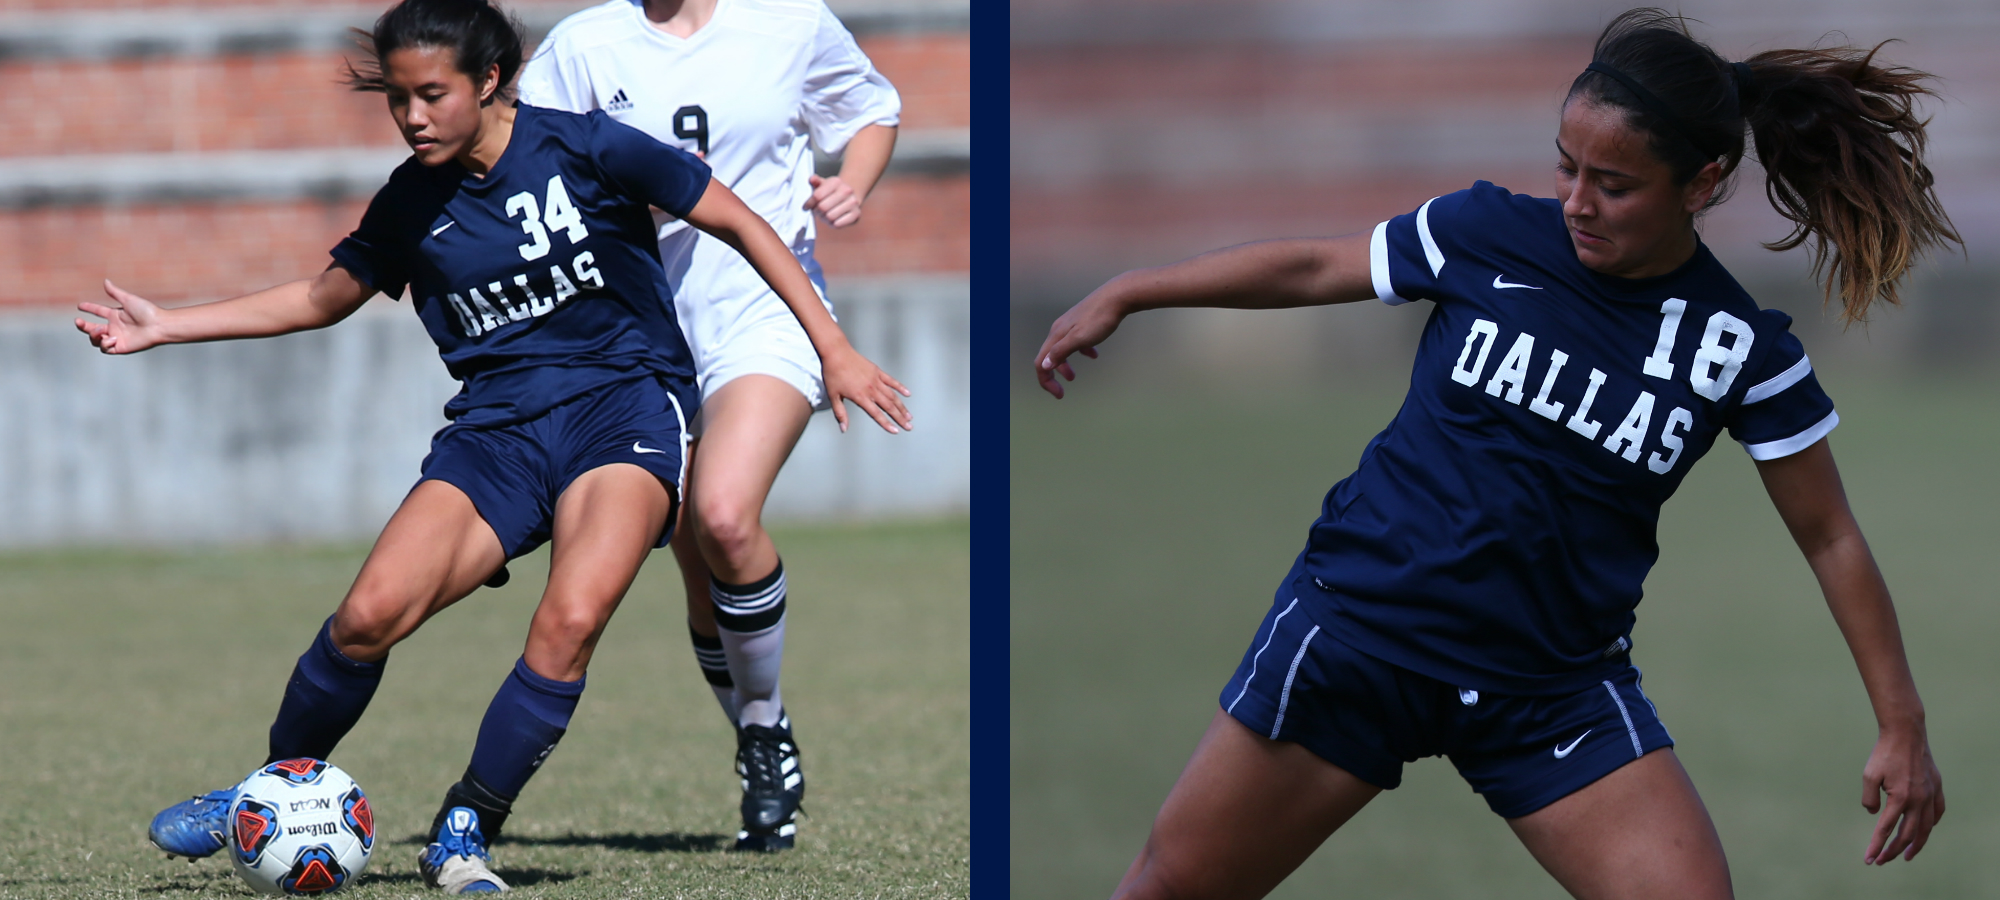 Duran and Lien Named to SCAC Women's Soccer All-Tournament Team